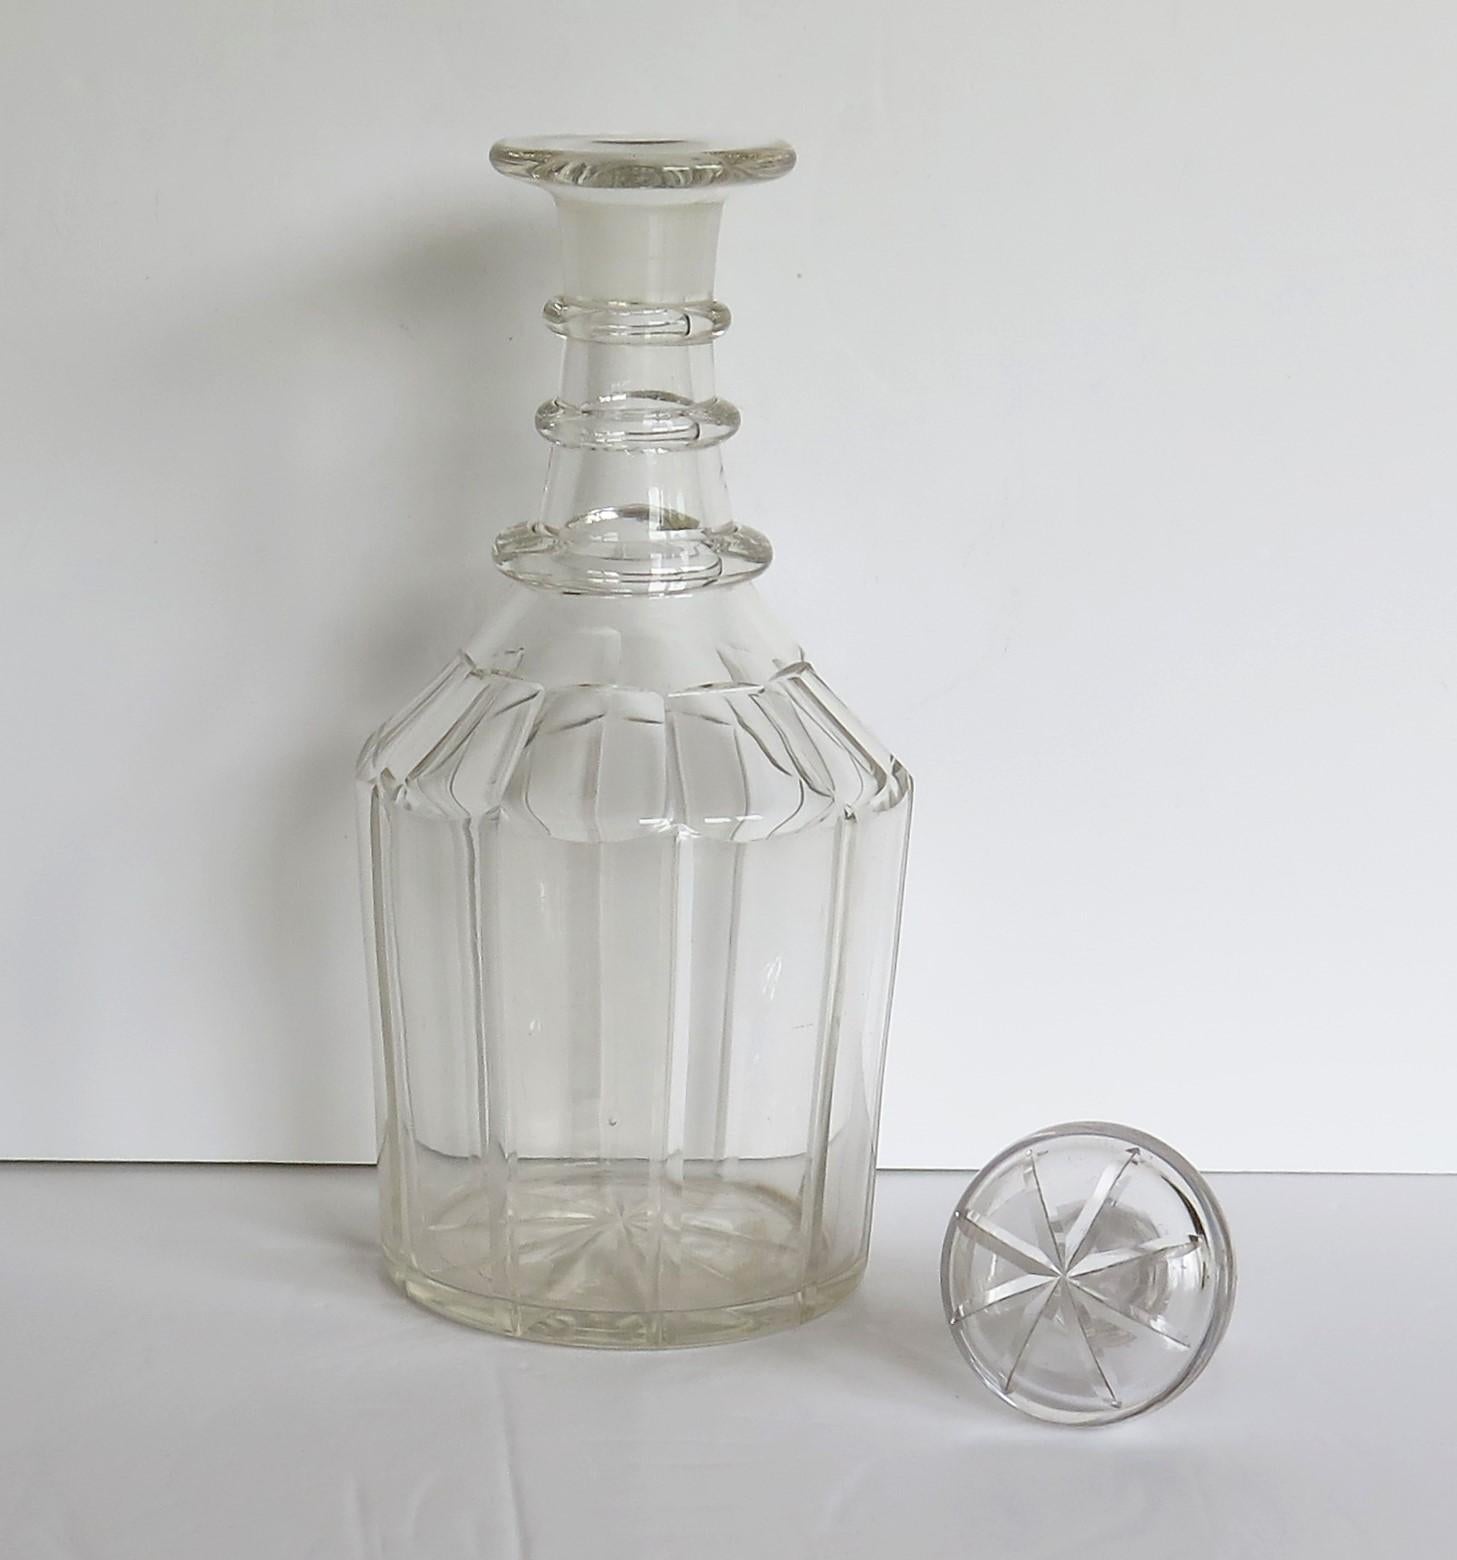 19th Century Georgian Crystal Lead Glass Decanter with Three Neck Rings and Mushroom Stopper 